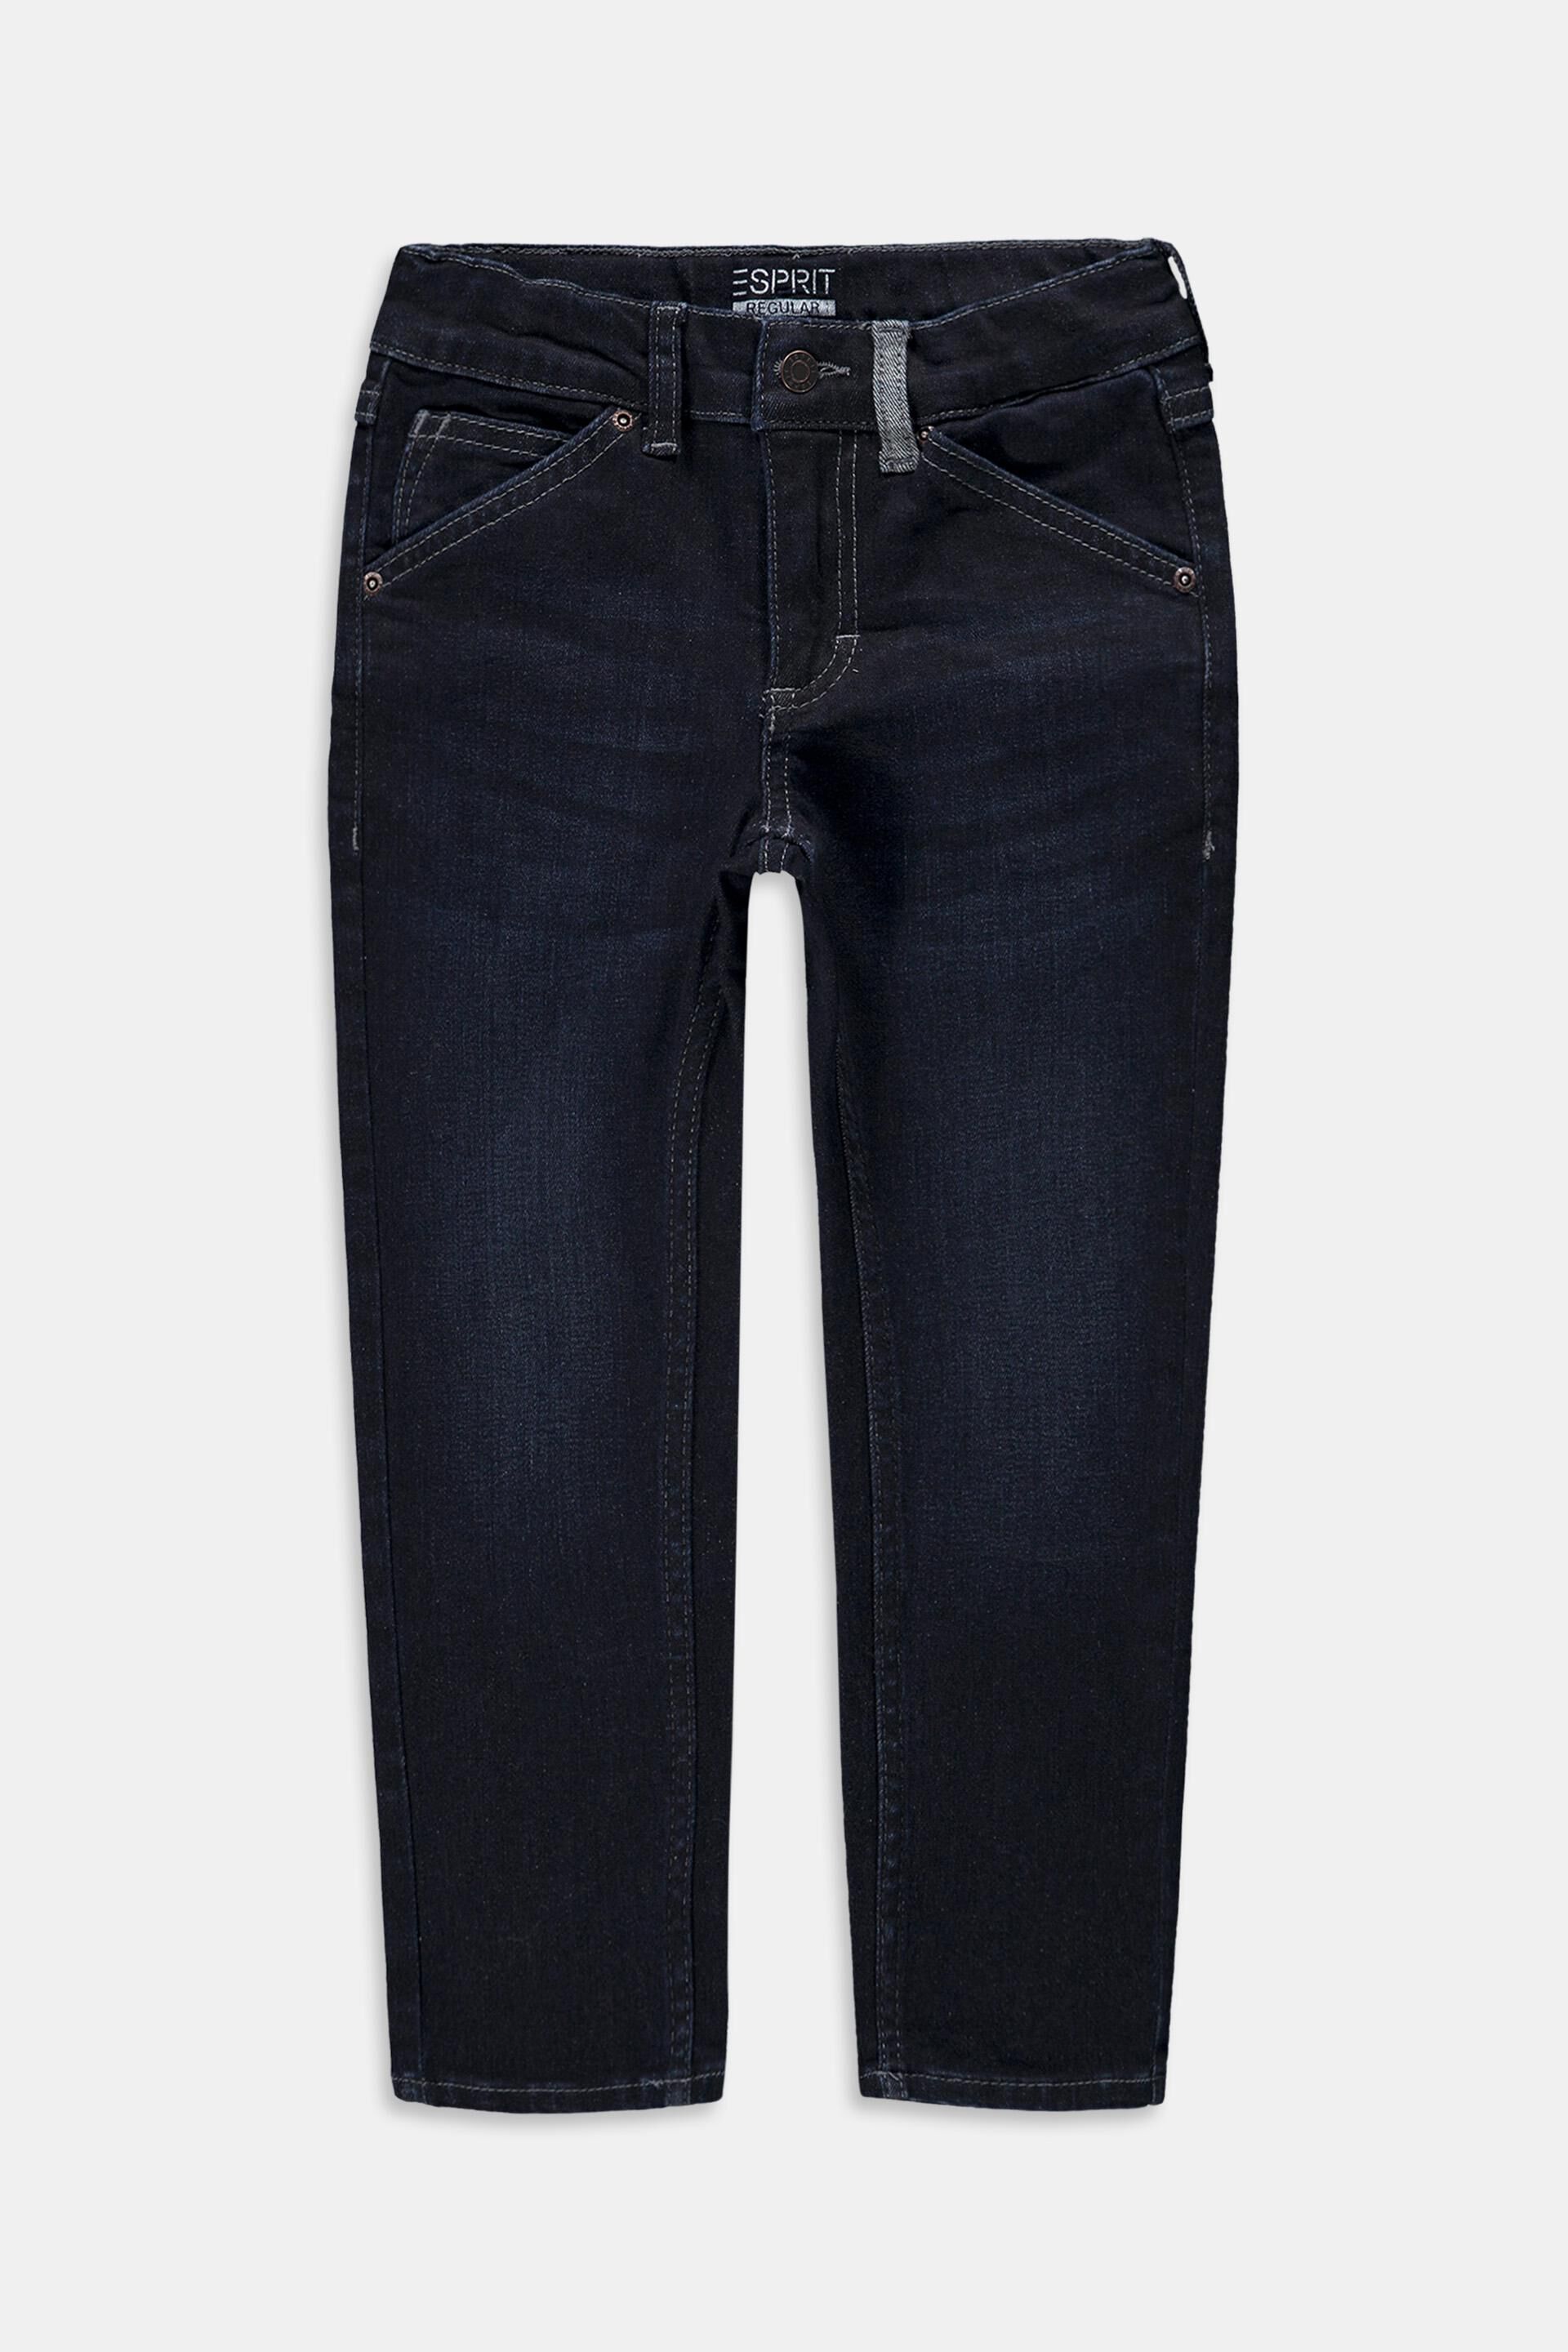 Edc By Esprit Jeans with adjustable waistband